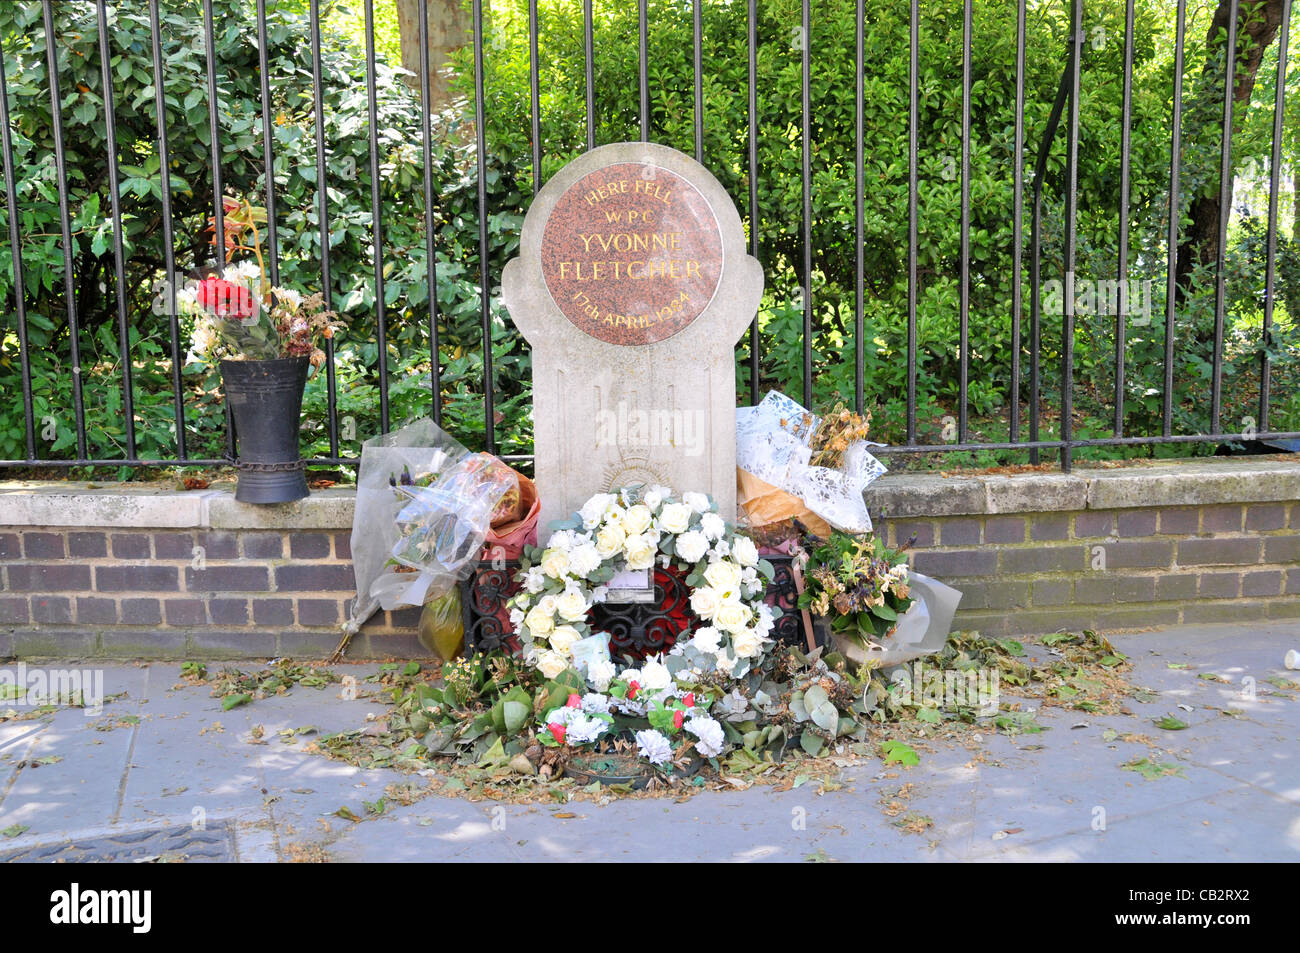 St James's Square, London, UK. 26th May 2012. The memorial stone to PC Yvonne Fletcher in St James's Square where she was shot, with a wreath laid by the Libyan PM Abdurrahim El-Keib. Stock Photo